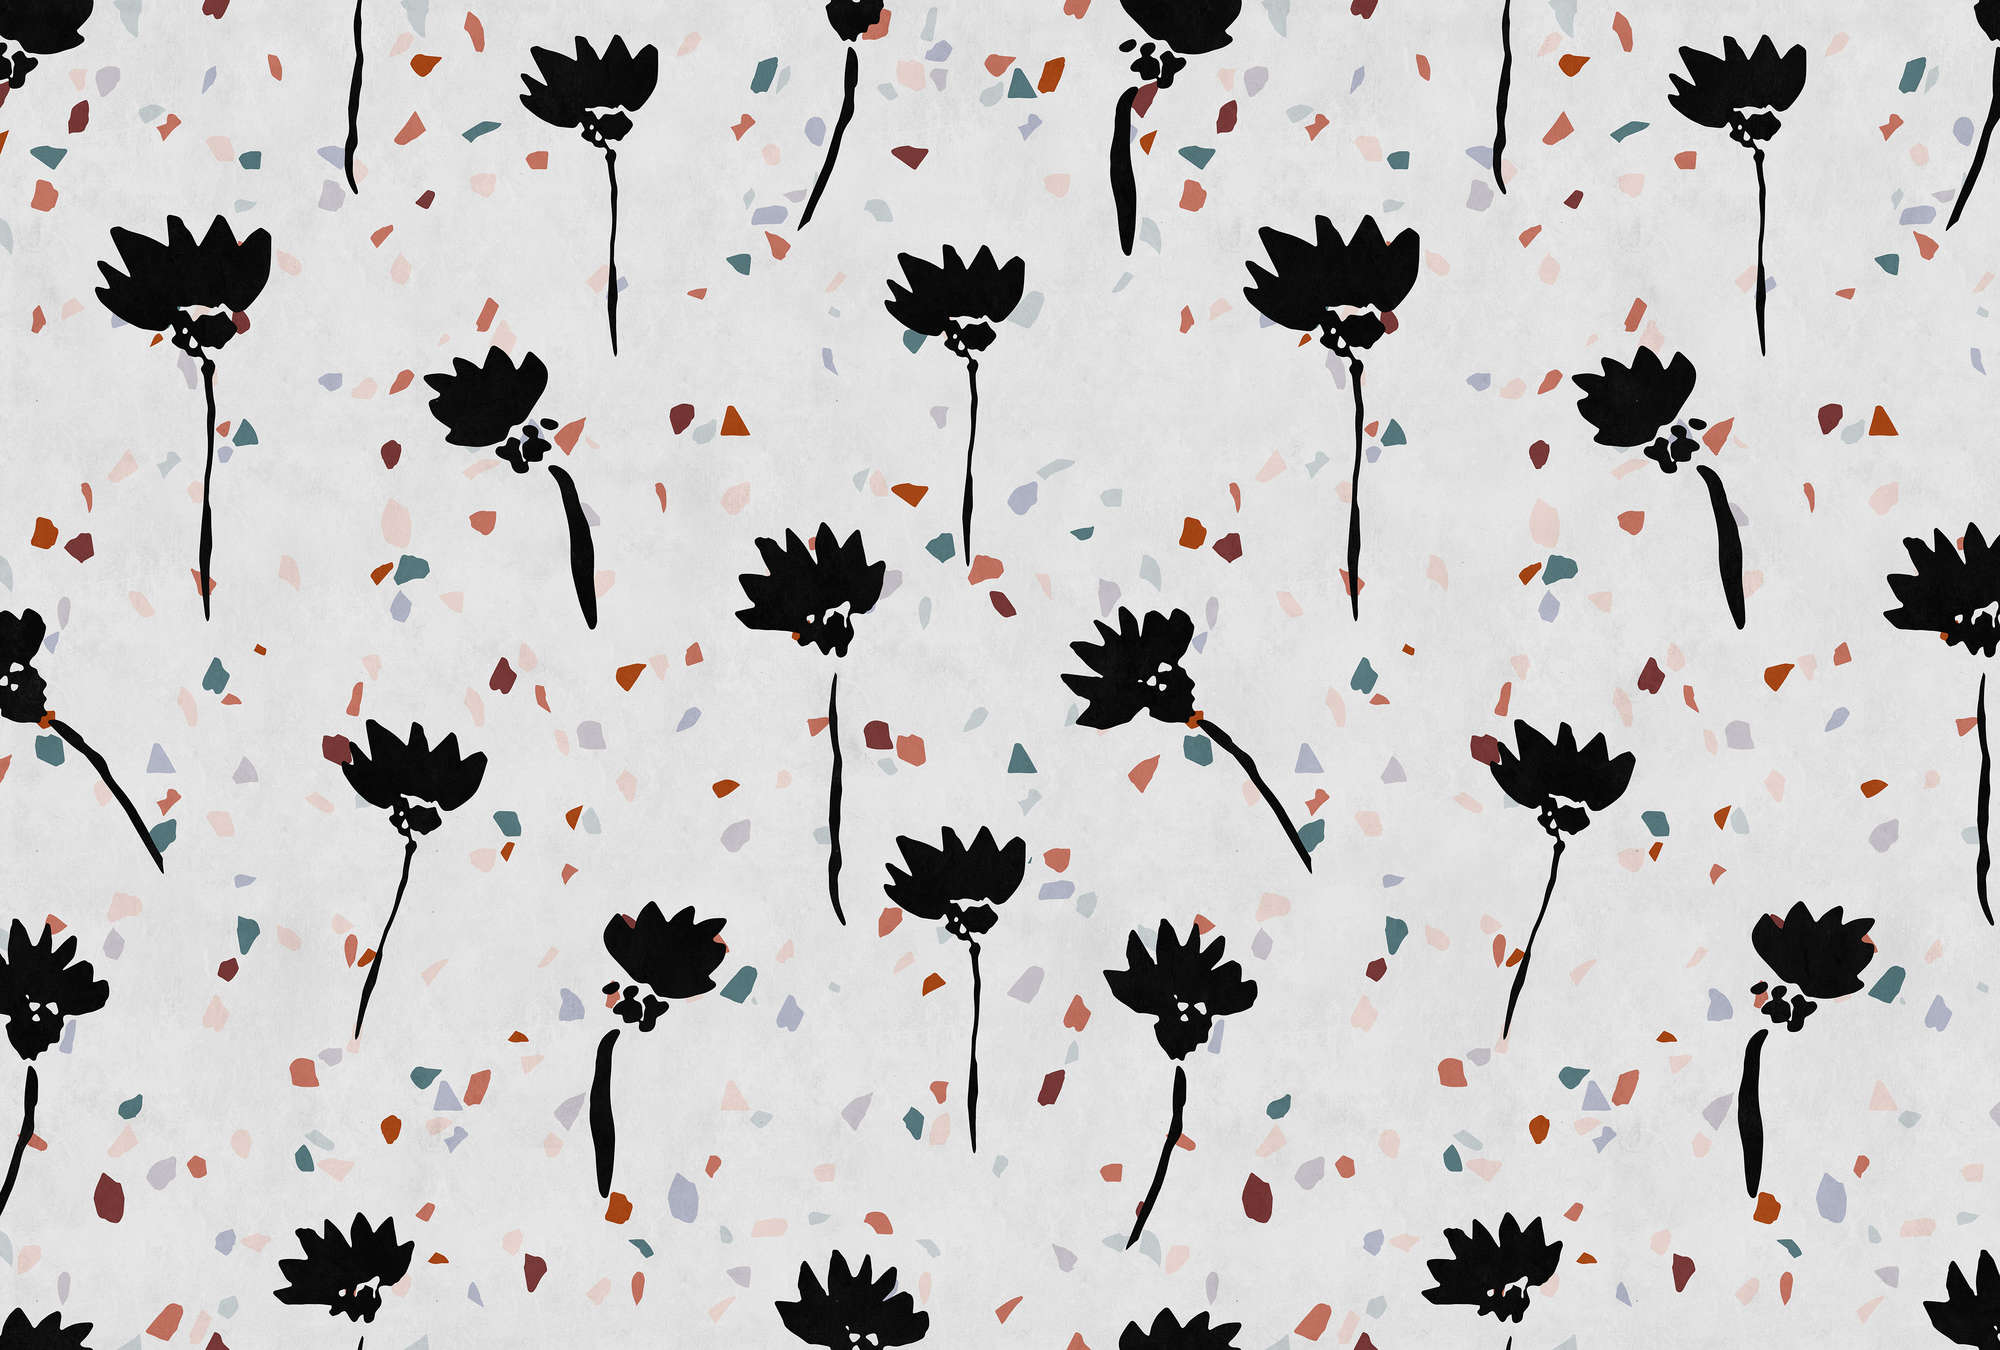             Terrazzo 2 - wallpaper in blotting paper structure terrazzo patterned, stone look - grey, red | structure non-woven
        